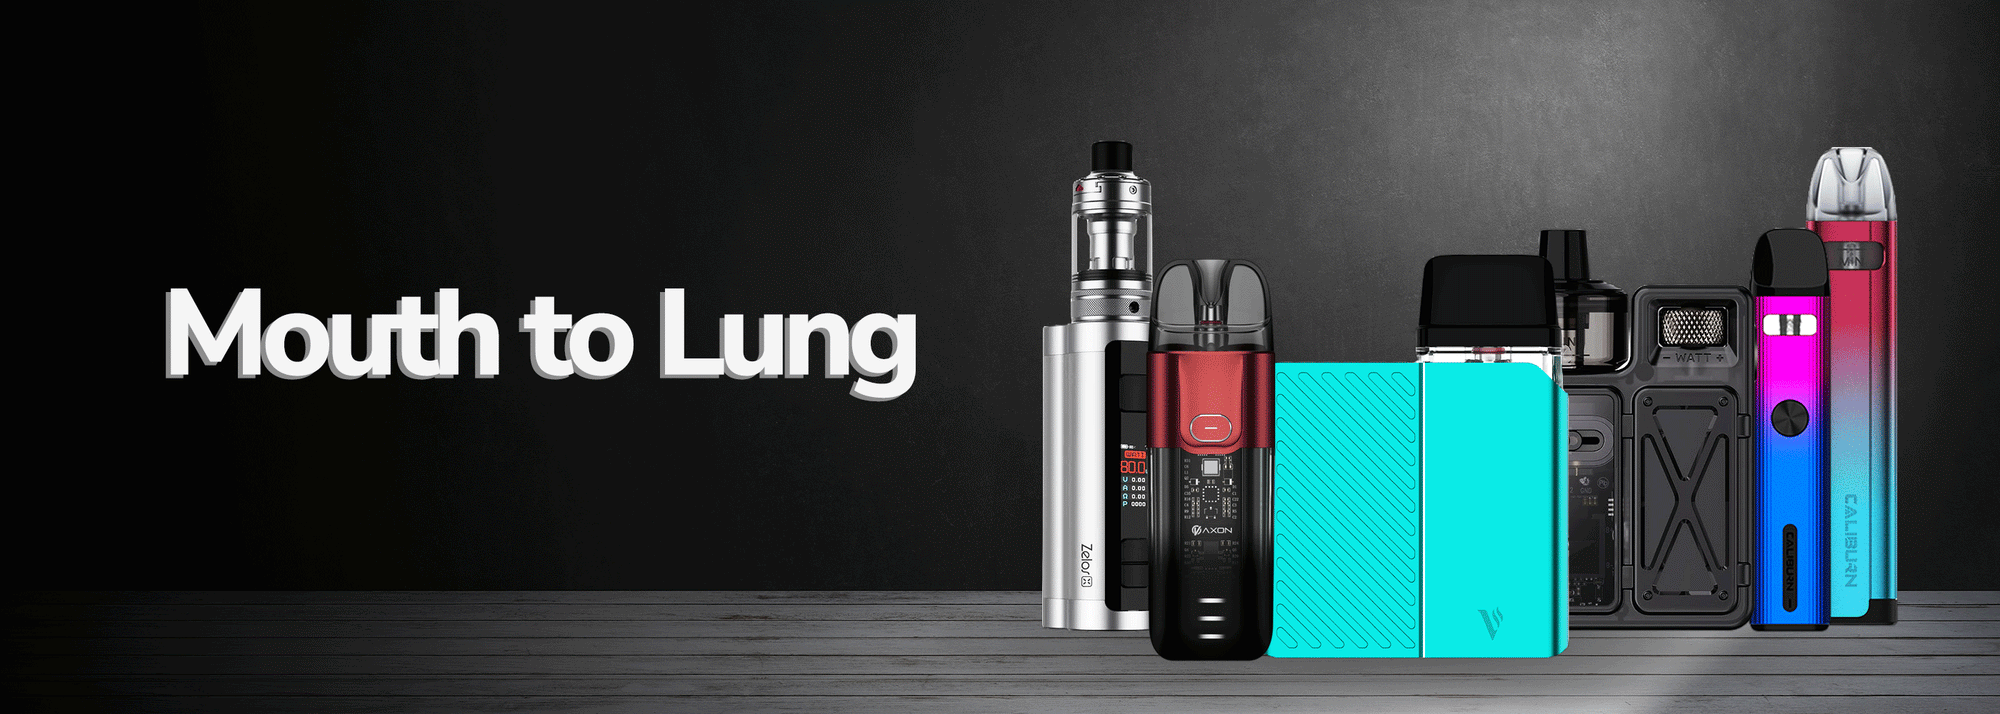 Buy Mouth to Lung Vape - Wick and Wire Co Melbourne Vape Shop, Victoria Australia